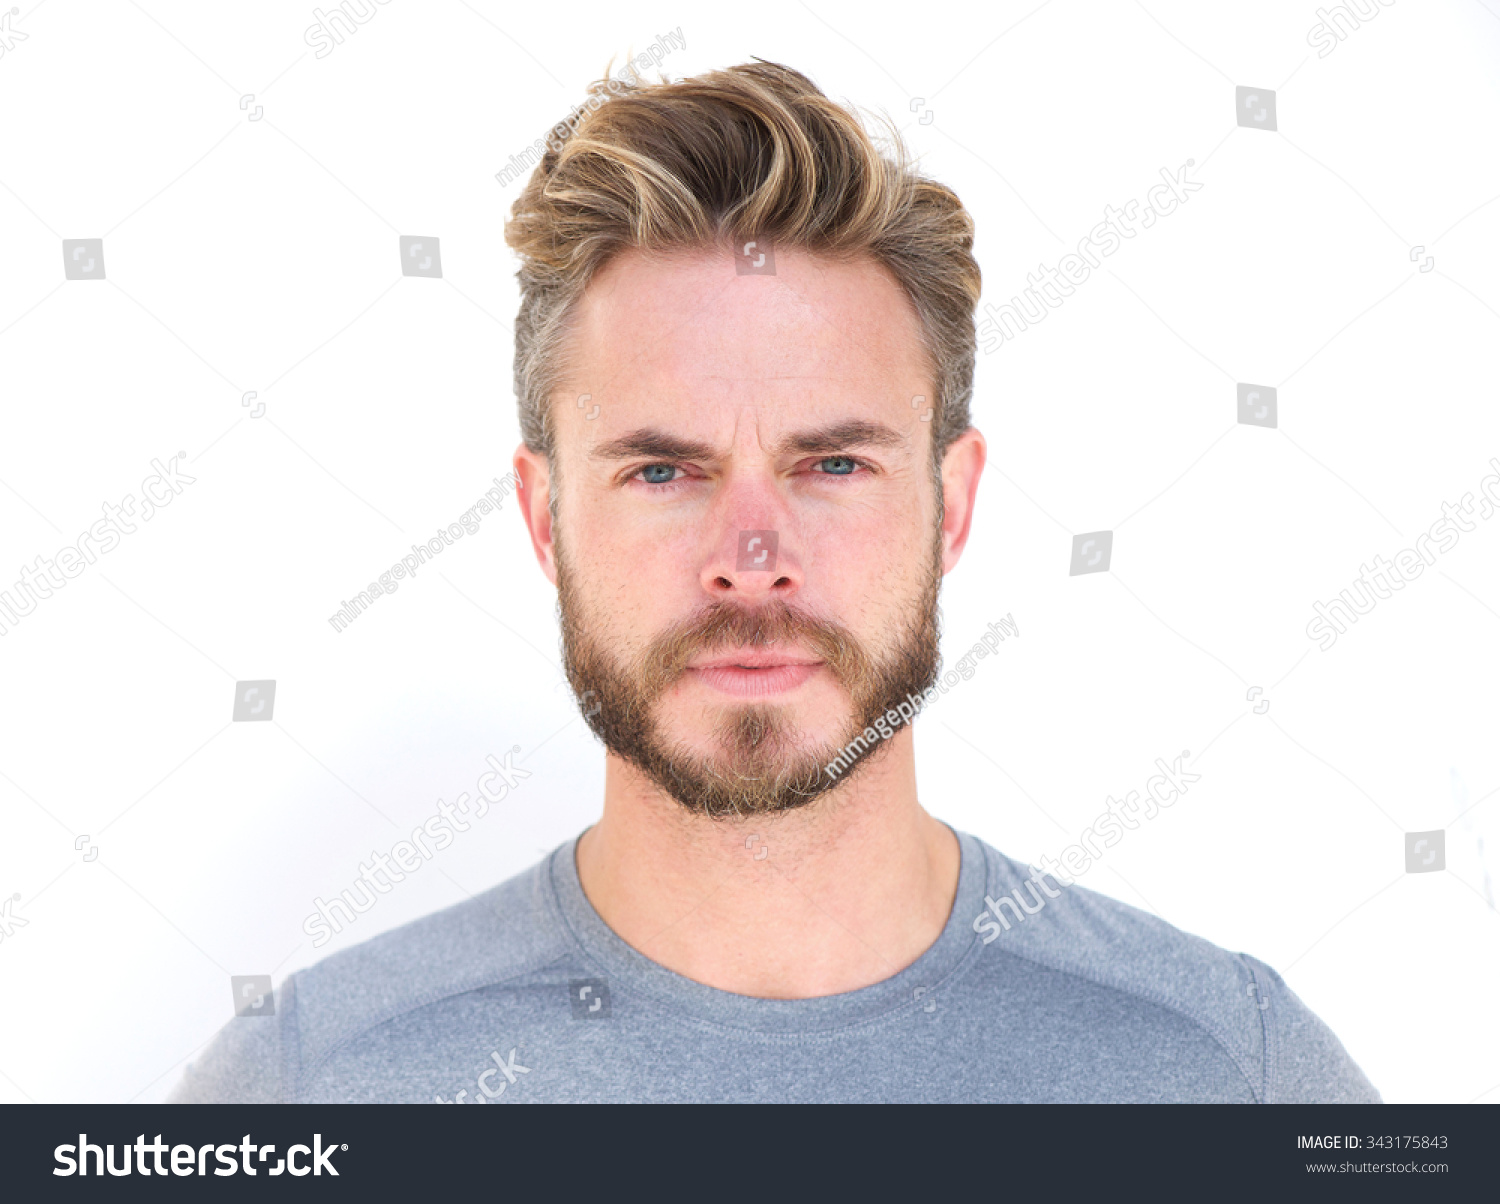 1. Mixed race man with blonde hair - wide 5